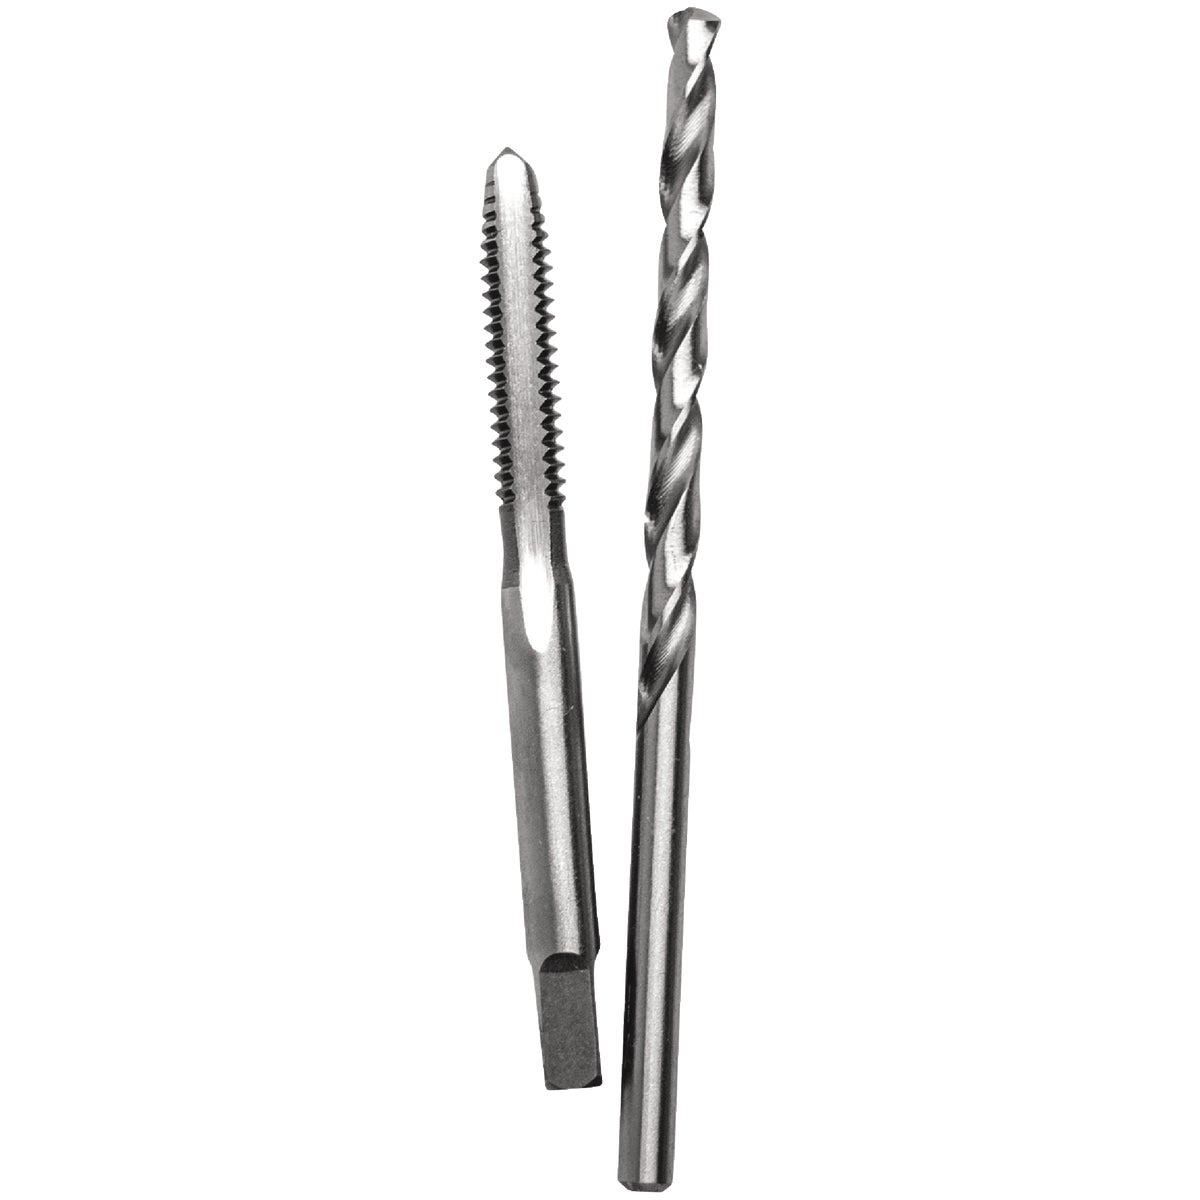 Century Drill & Tool 3/8-24 National Coarse Plug Carbon Steel Tap & 21/64 In. Brite Drill Bit Combo Pack